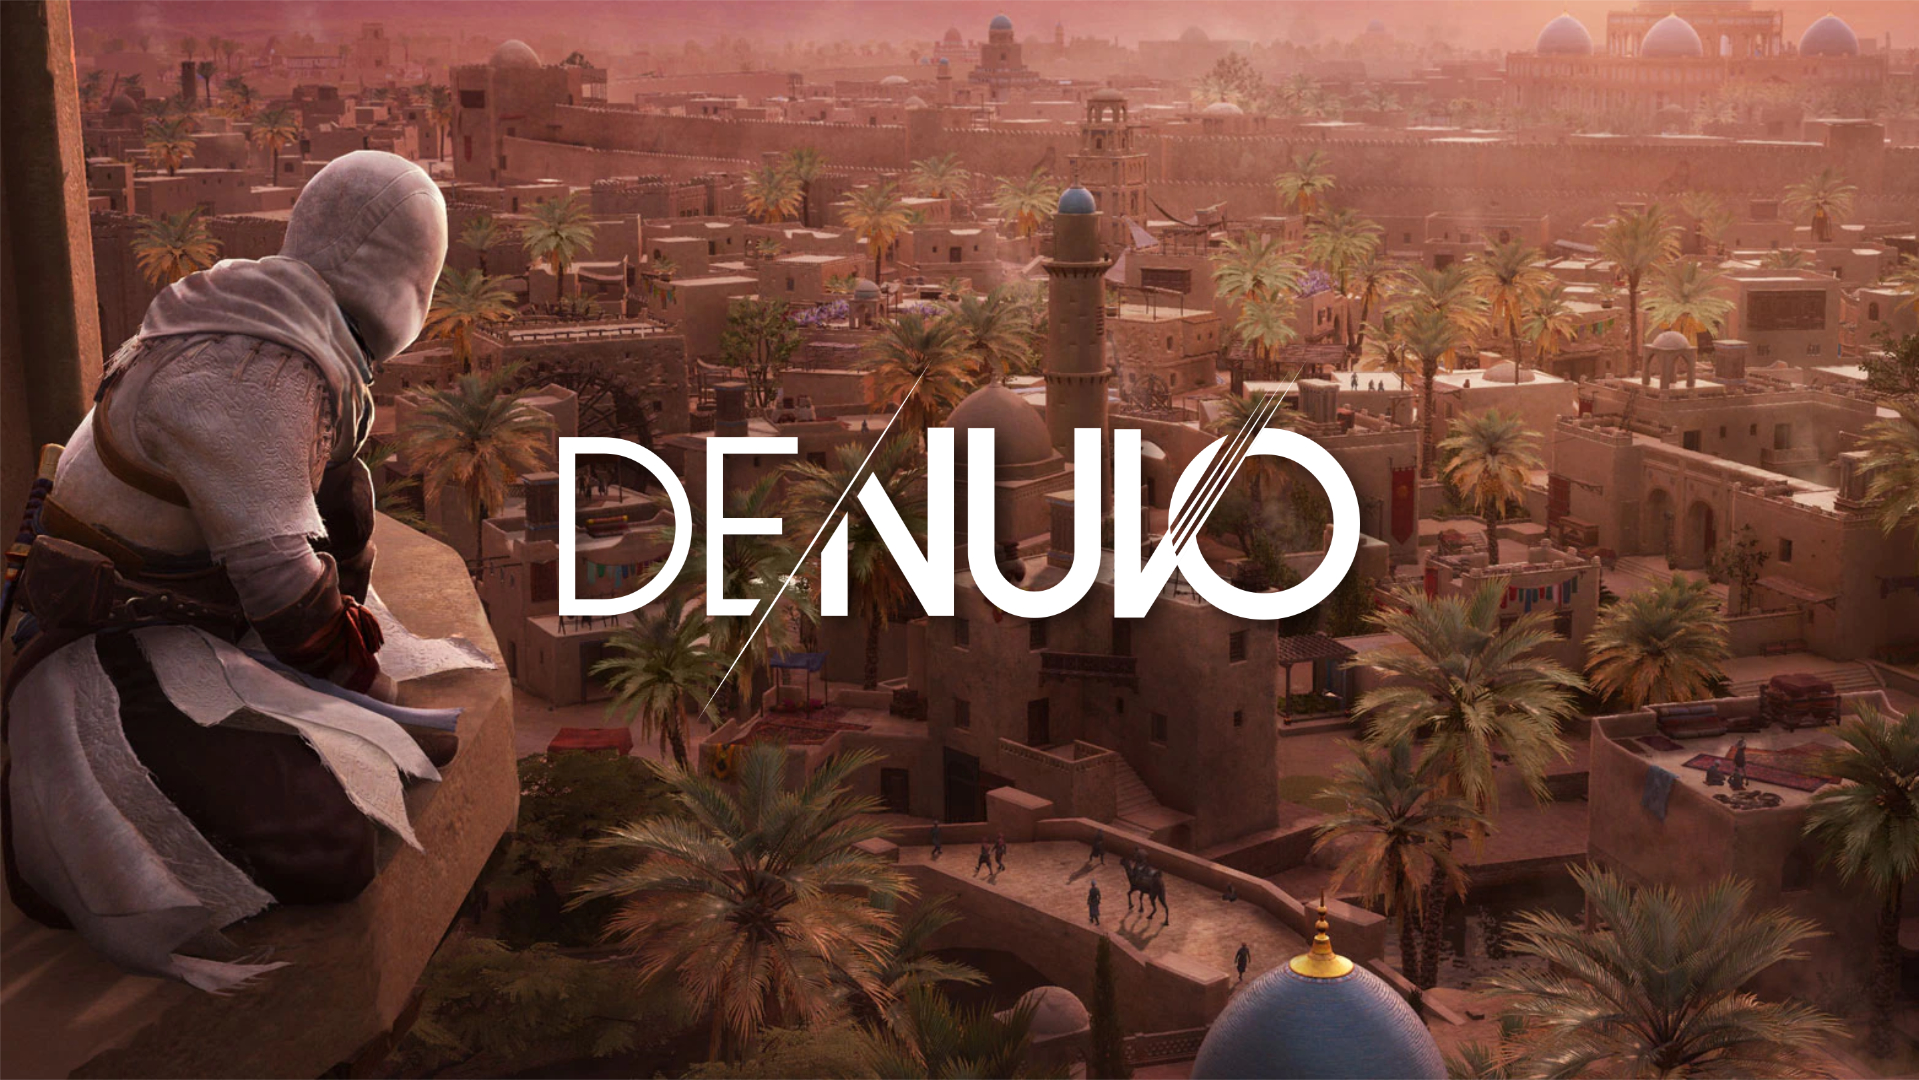 Ubisoft added Denuvo to Assassins Creed Mirage via a day-1 patch a